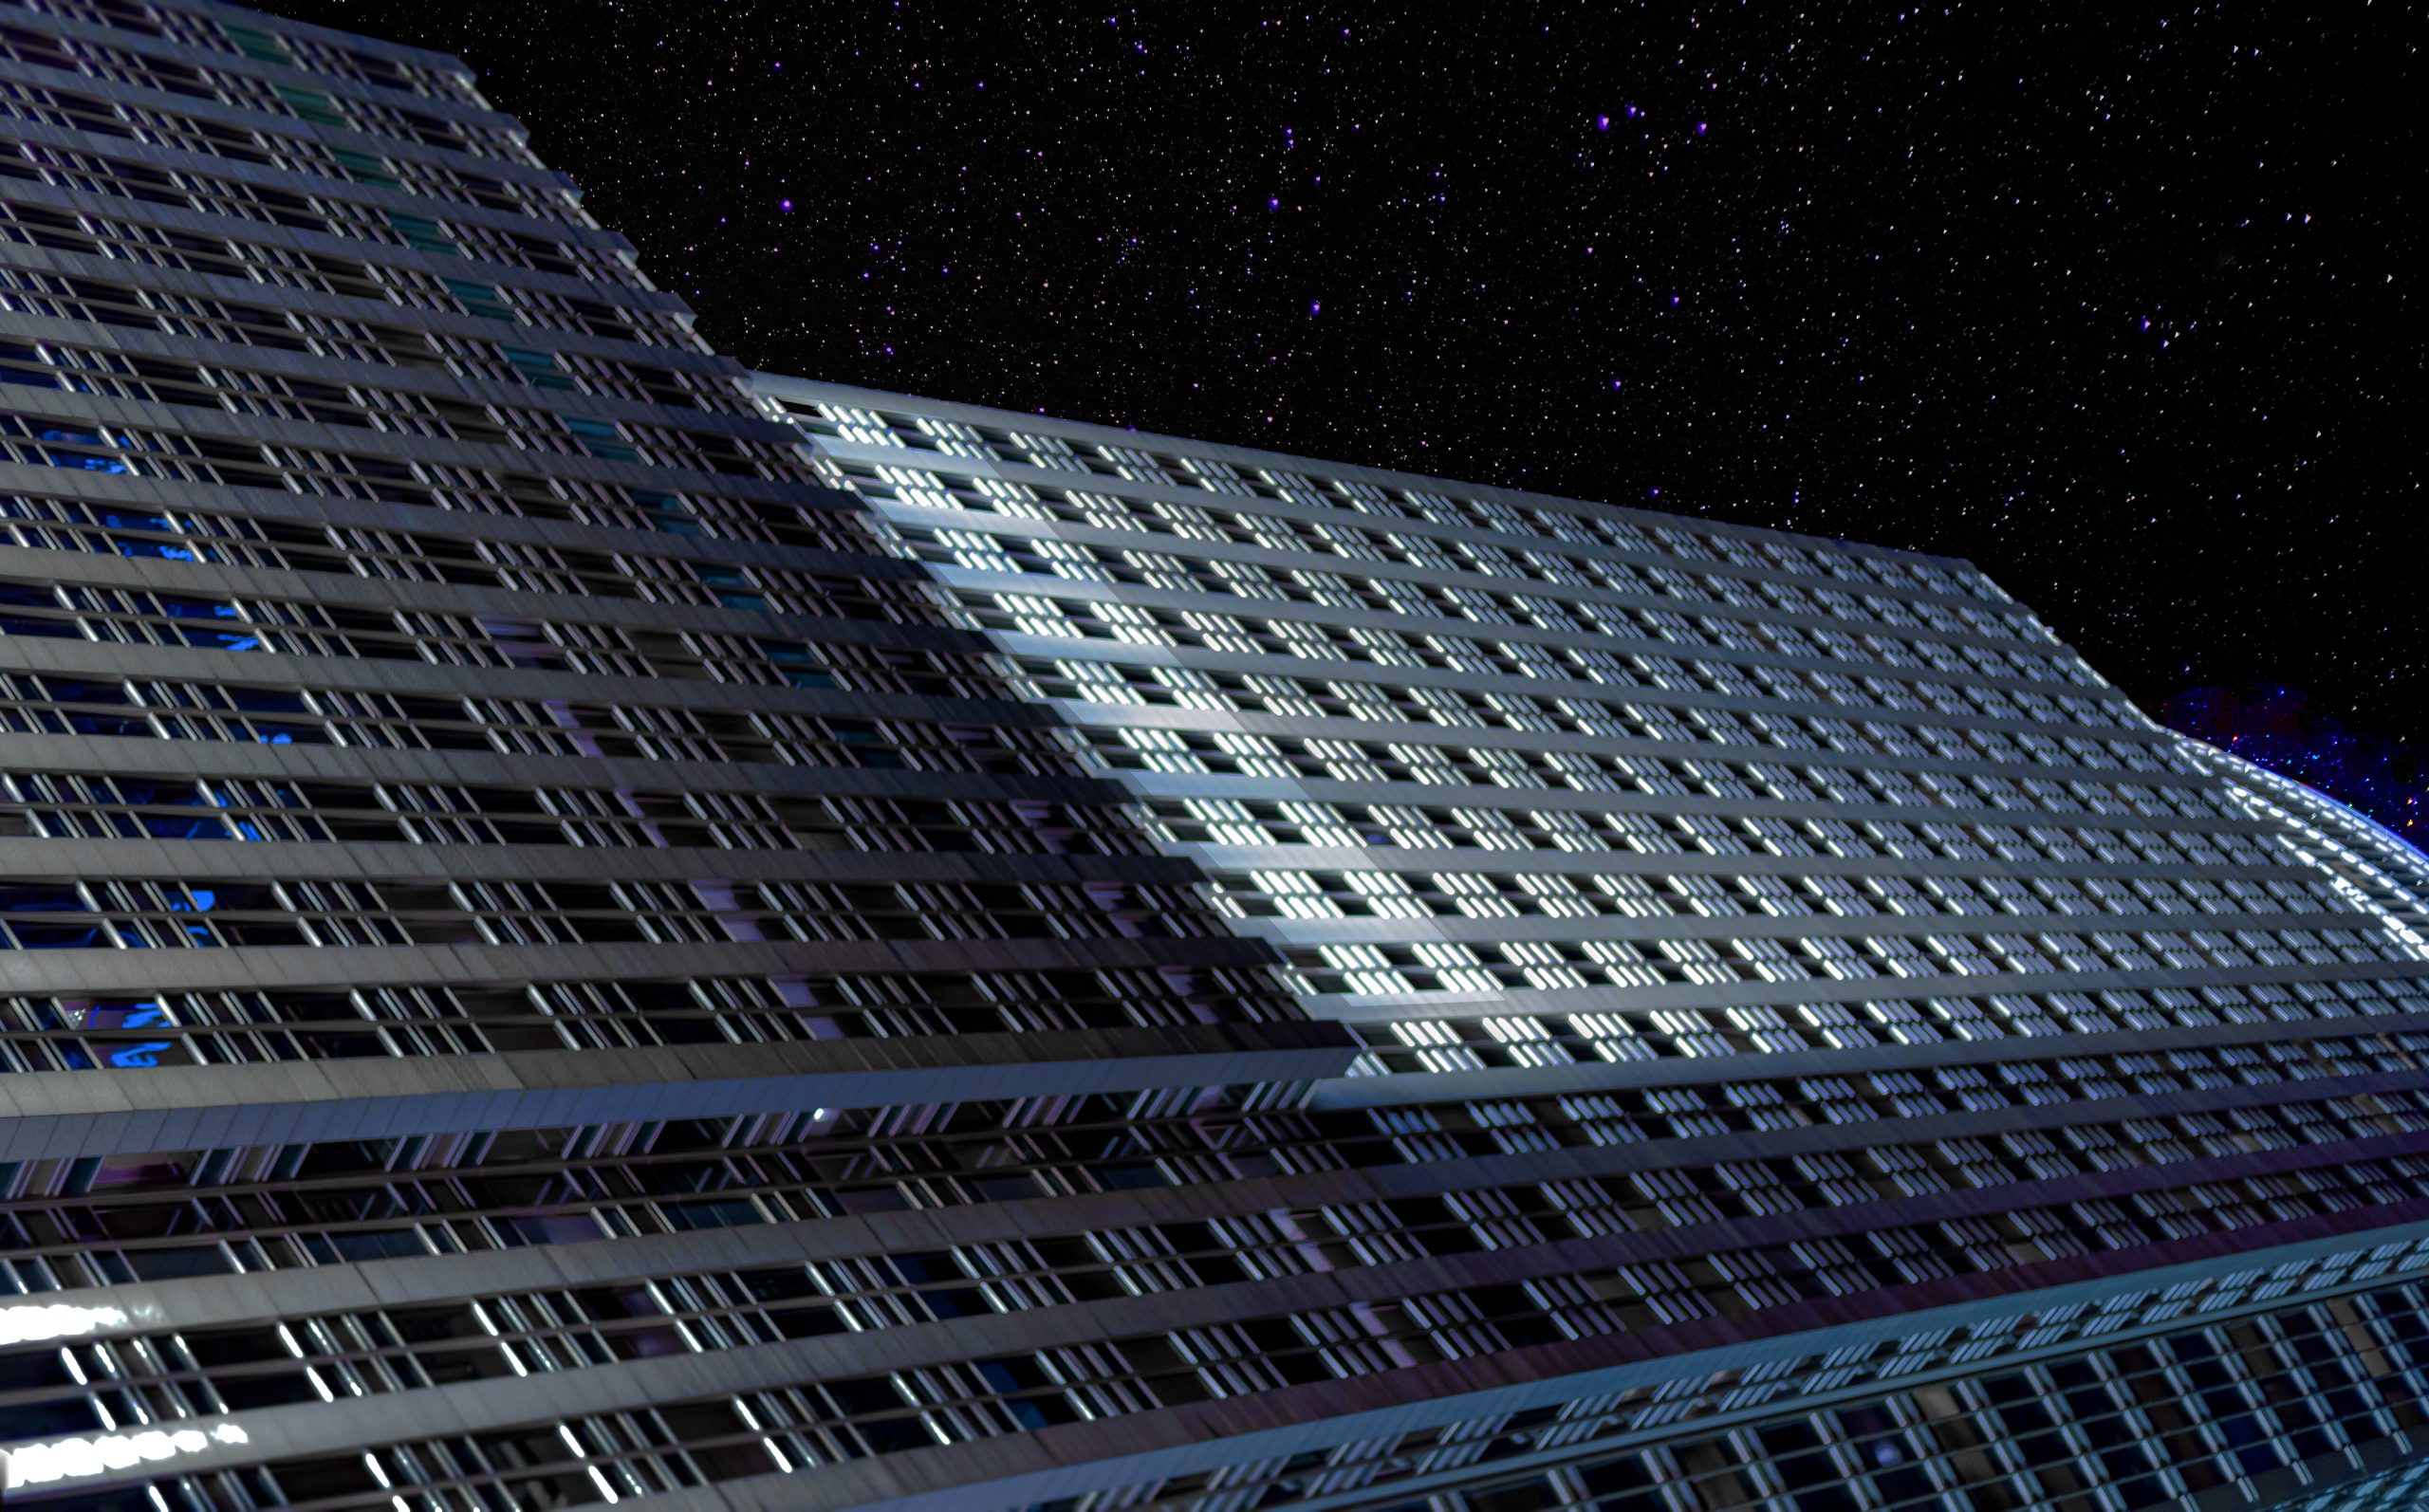 A skyscraper from downtown Omaha Nebraska superimposed and edited into a science fiction setting.